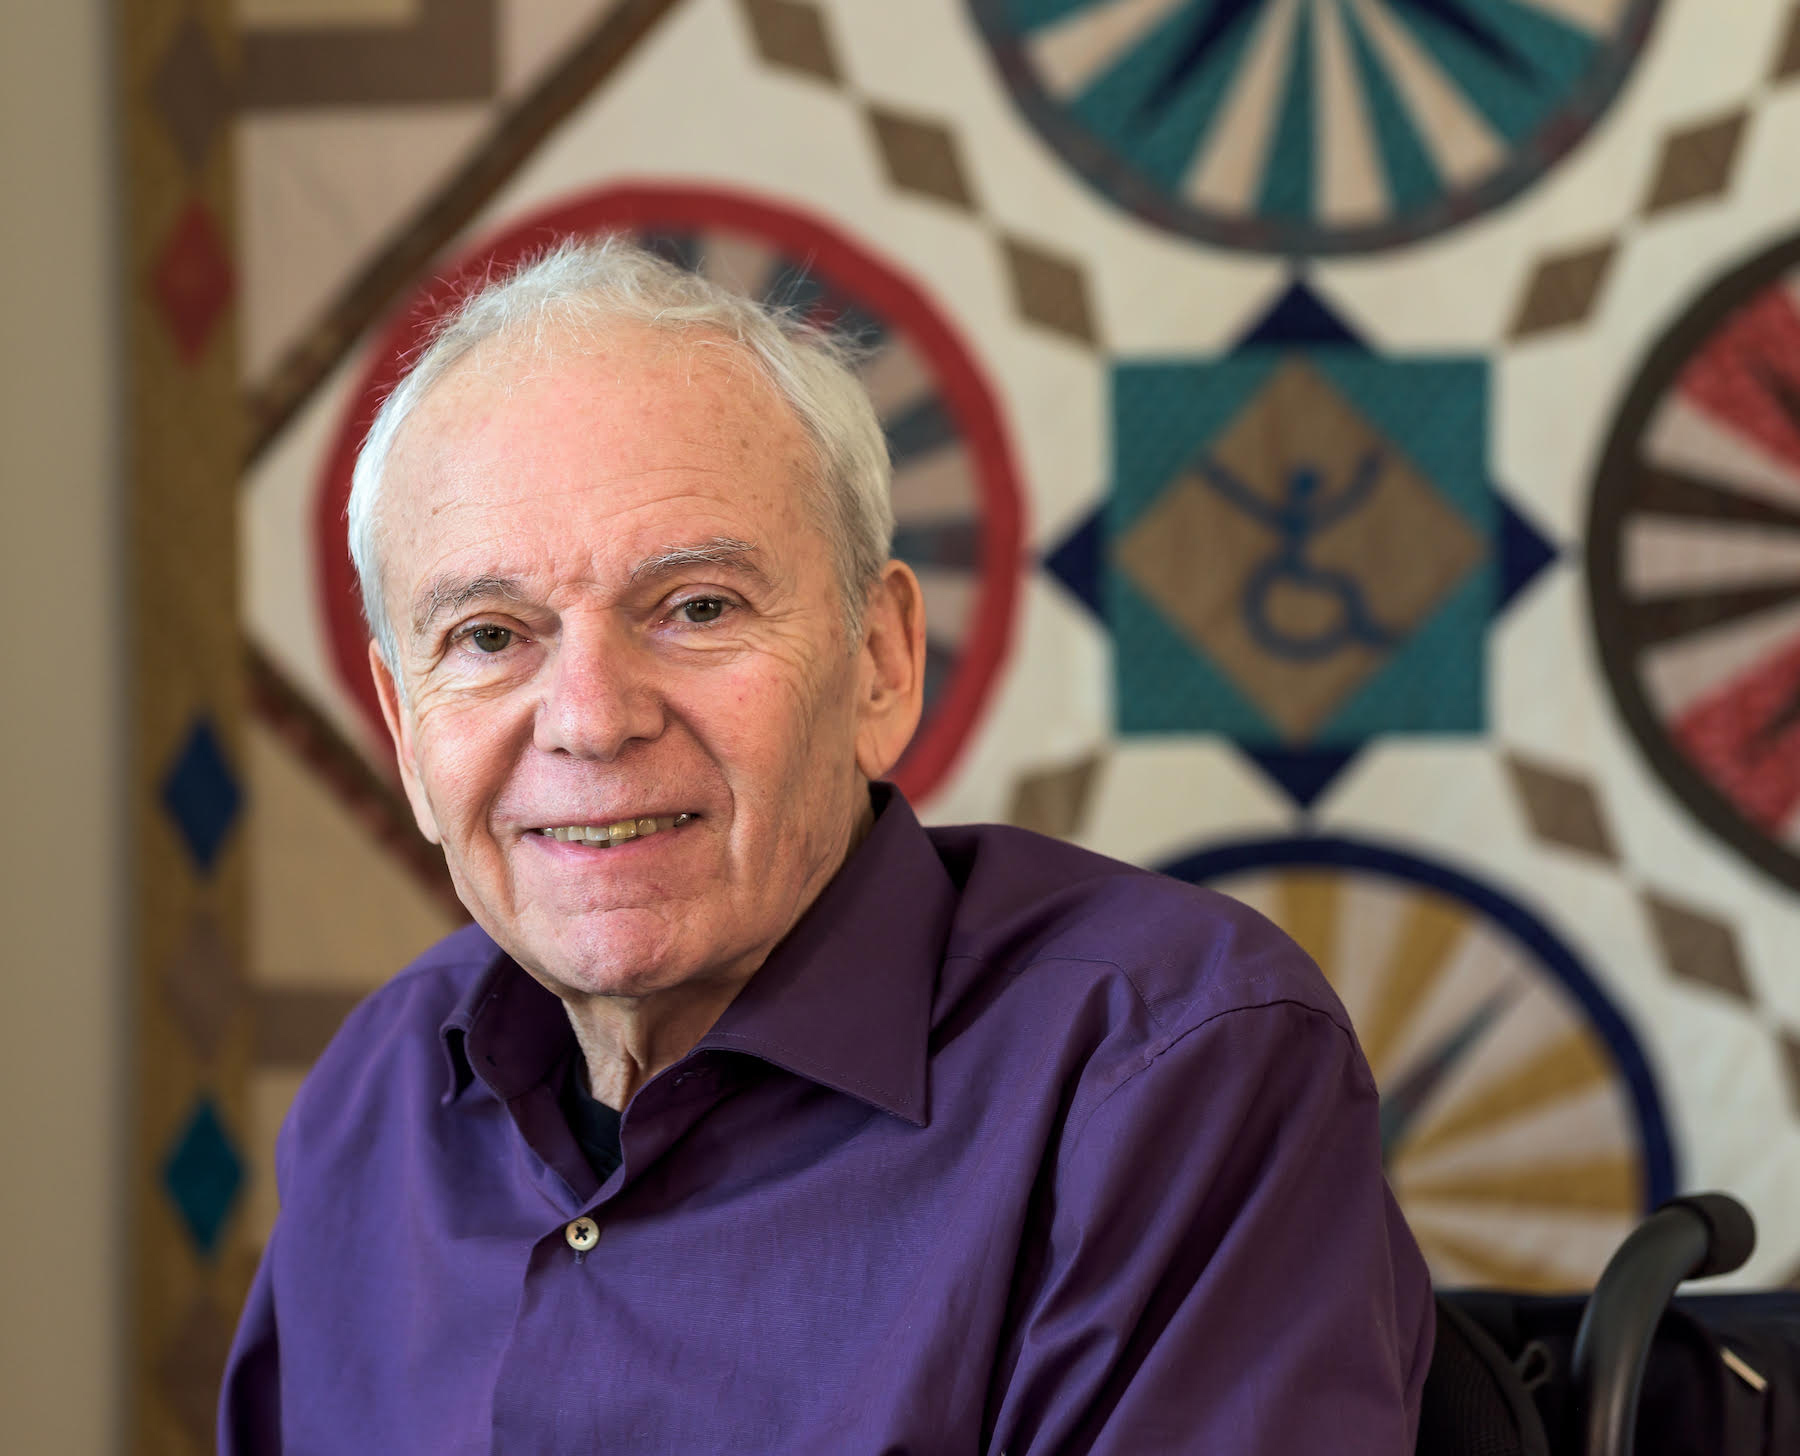 Portrait of Anthony, a white male in a purple collared shirt, in front of a quilt that has a the ADAPT logo on it.